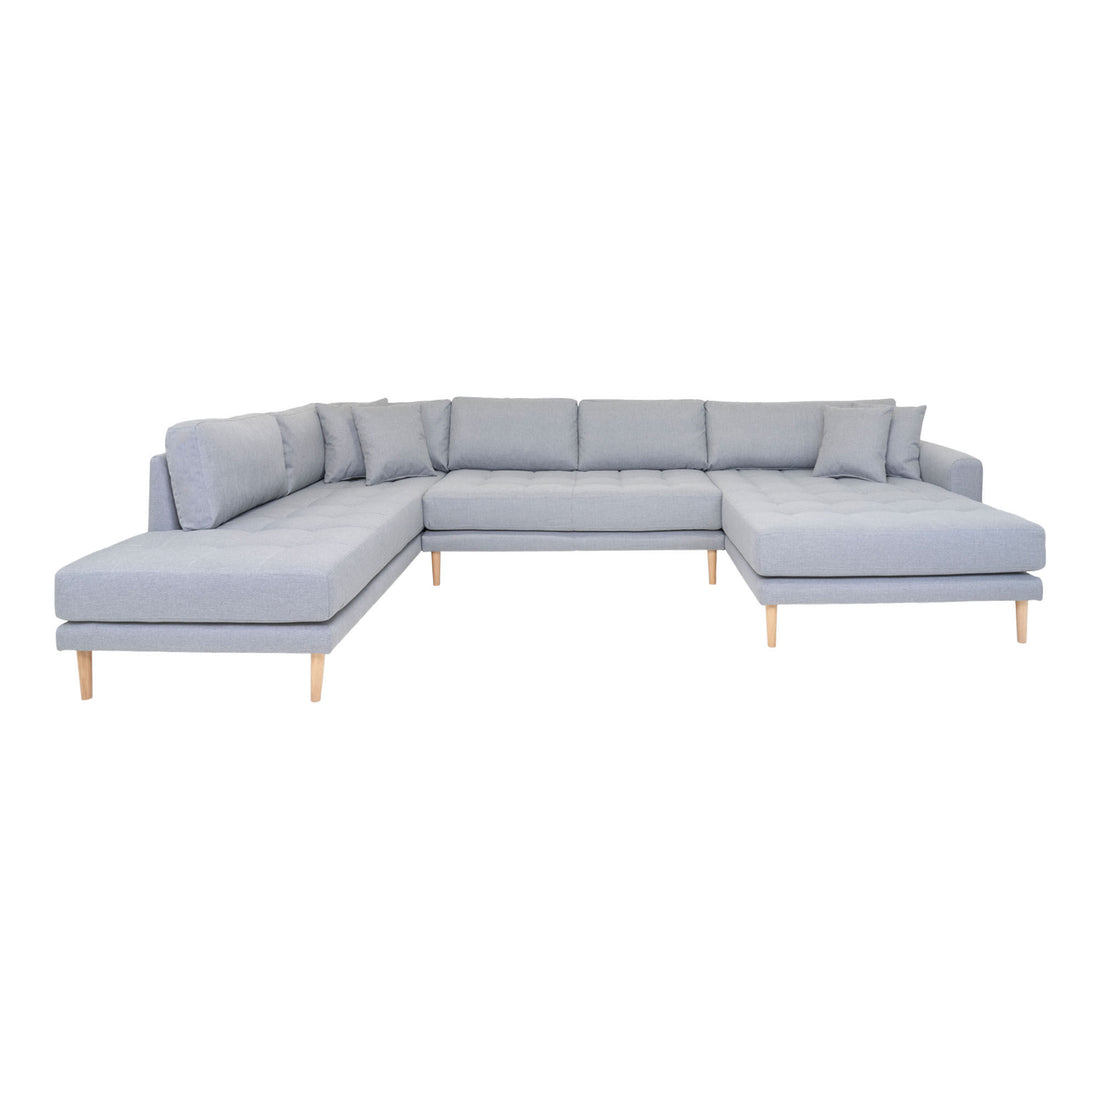 Lido U -Sofa Open End - U -Sofa Open End, right -wing in light gray with four pillows and nature wooden legs, HN1001 - 1 - pcs